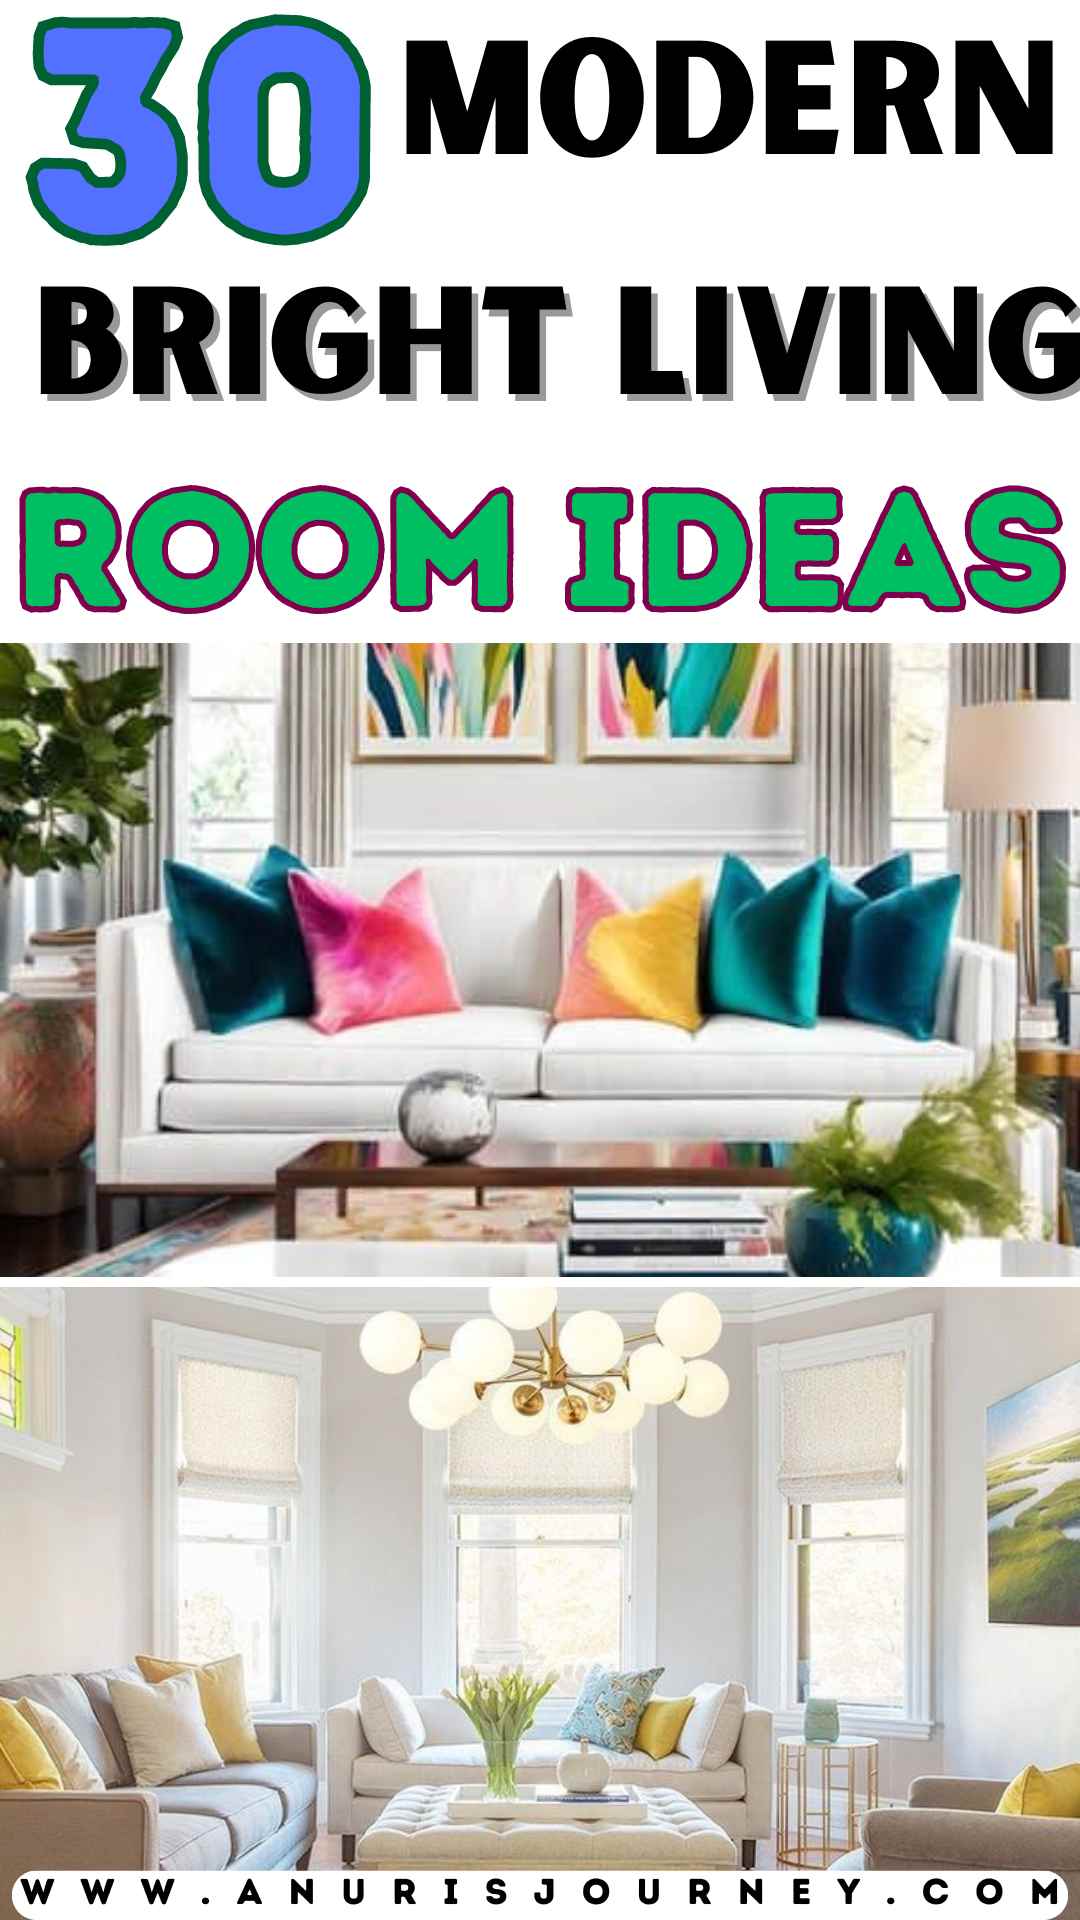 30 MODERN BRIGHT LIVING ROOM IDEAS TO LIVEN YOUR SPACE - Anuri's Journey